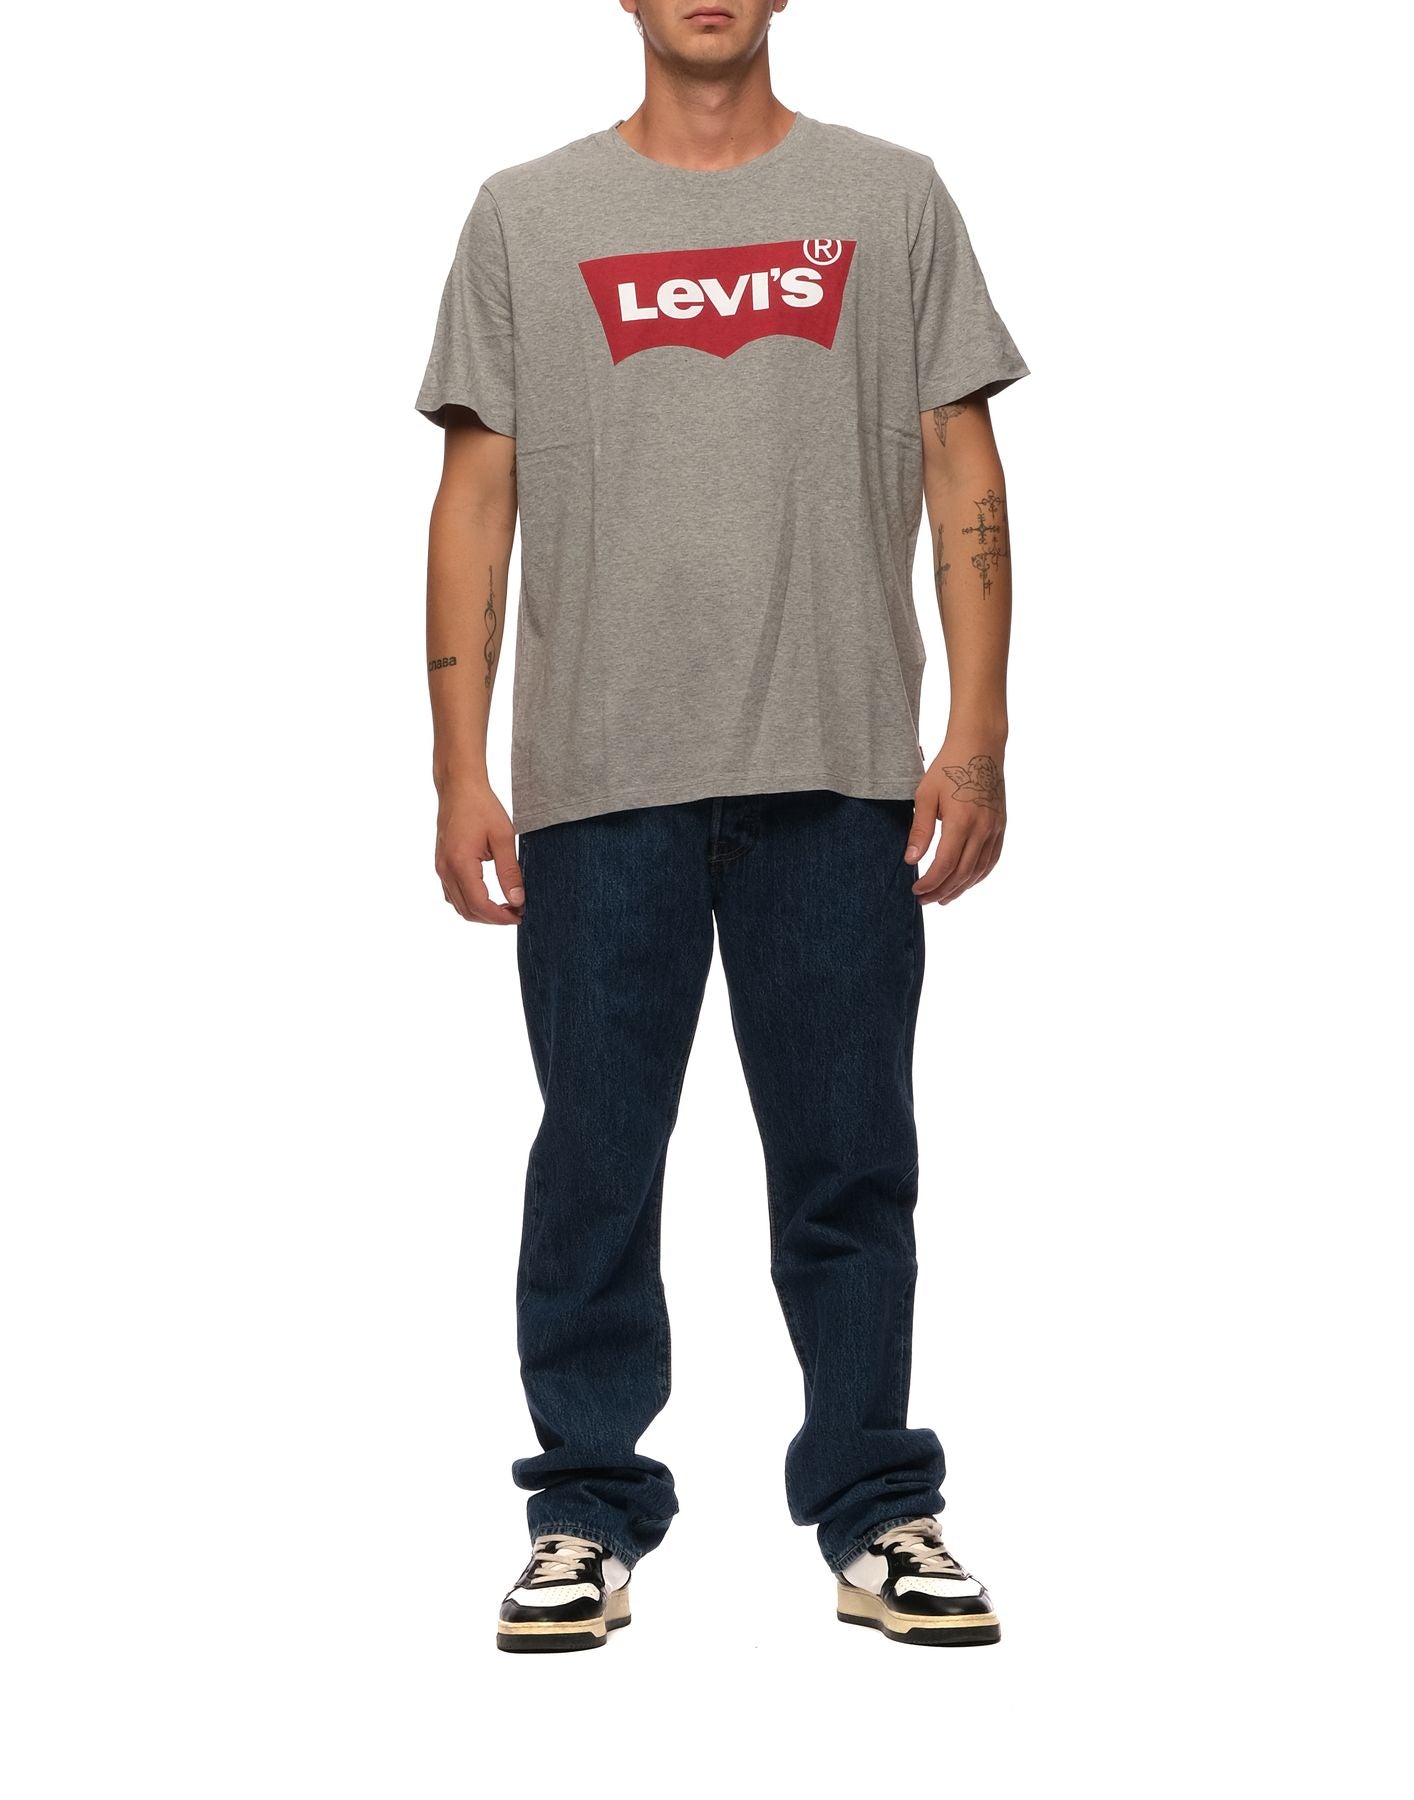 T-shirt for man 17783 0138 GREY Levi's